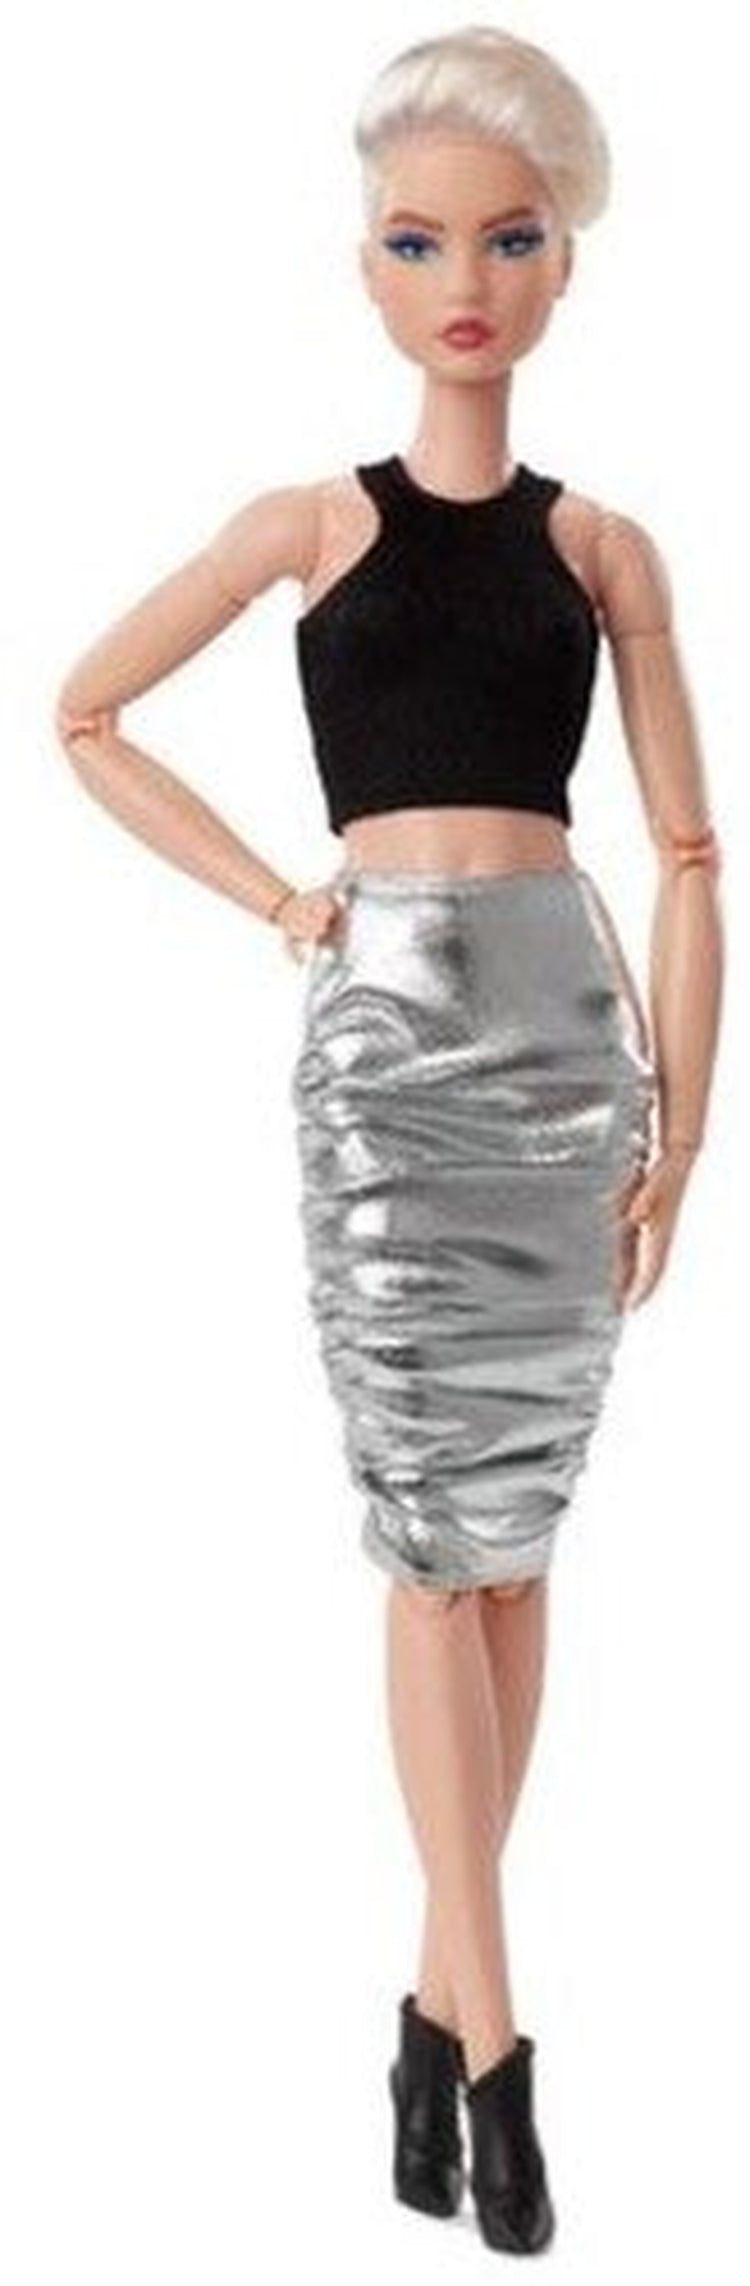 Mattel - Barbie Signature Looks Doll, with Black Sleeveless Top, Silver Skirt and Short Platinum Hair